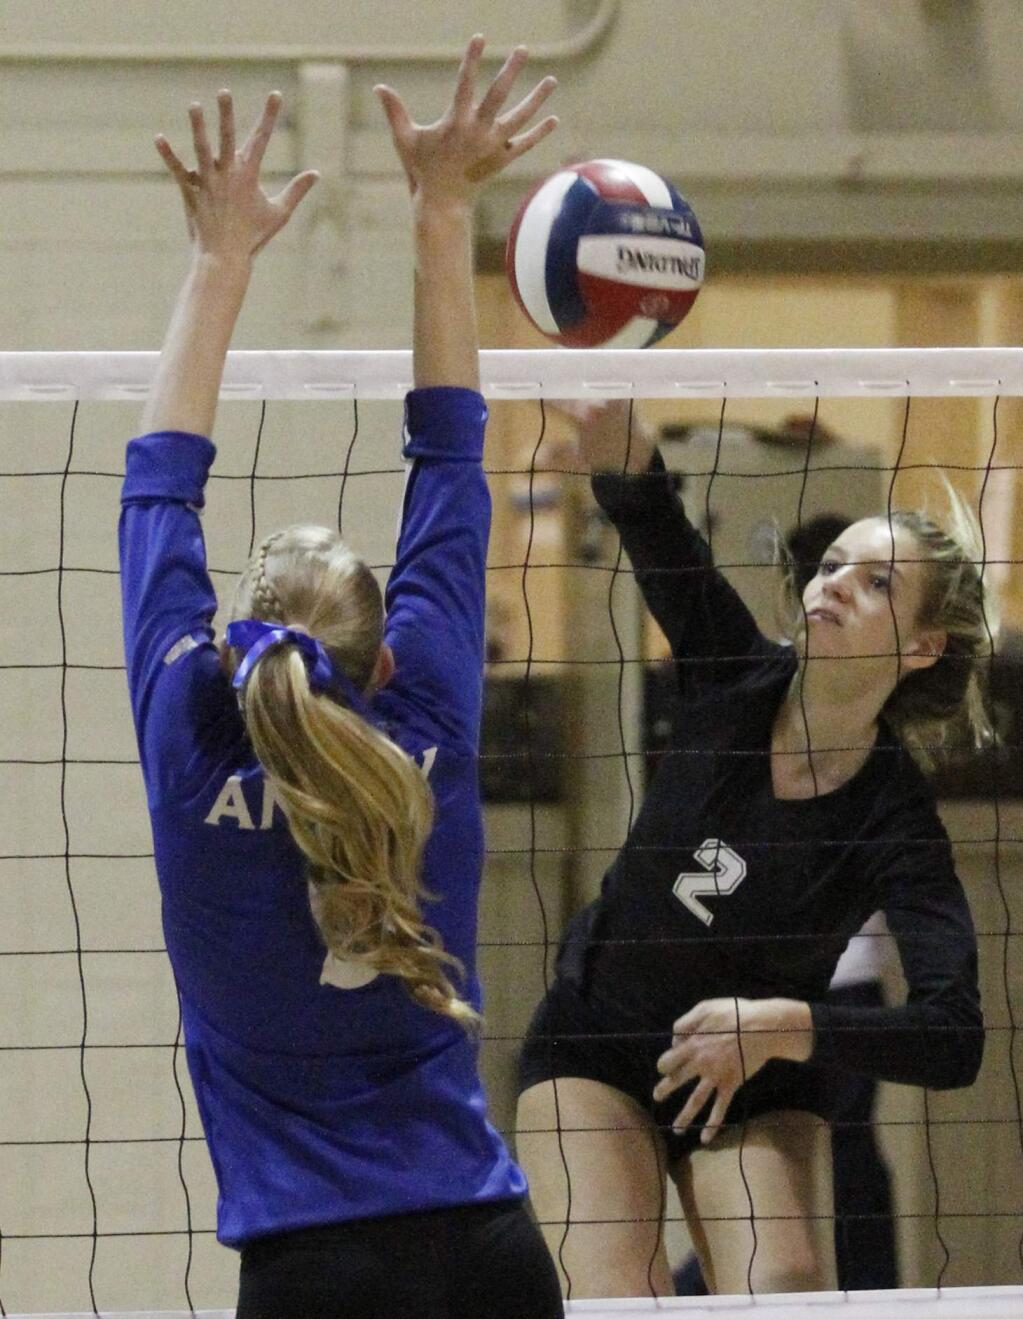 Bill Hoban/Index-TribuneSonoma's Jenna Mak dumps the ball over the net during last Thursday's match against Analy. The Lady Dragons swept the Tigers in three straight sets. Sonoma is at Healdsburg tonight, Tuesday, and at Piner on Thursday.